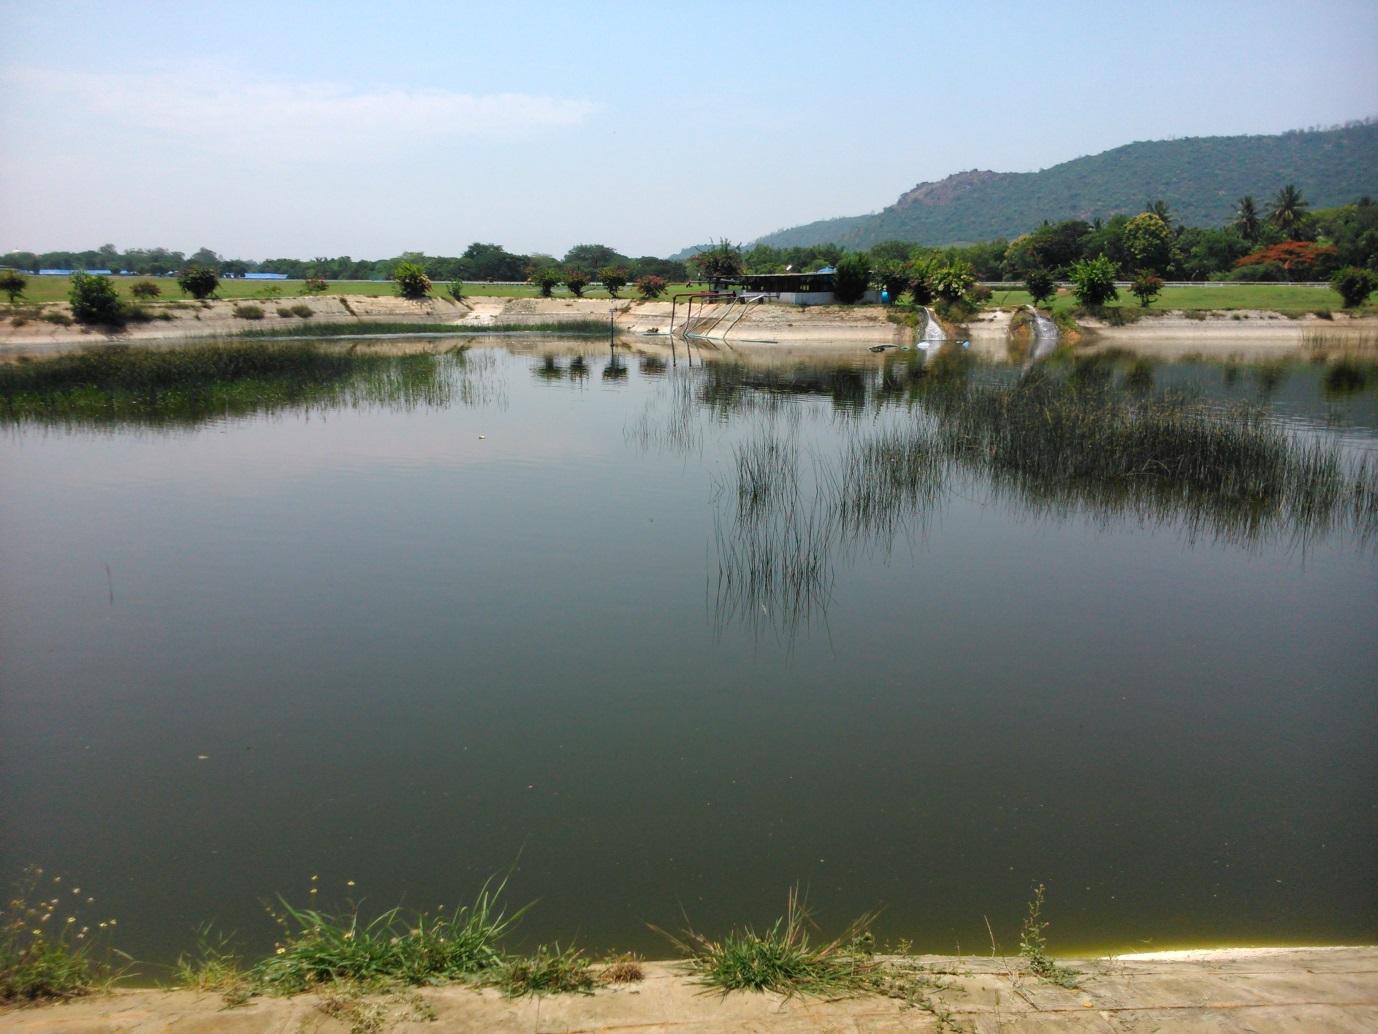 Pond used for temporary storage of treated wastewater